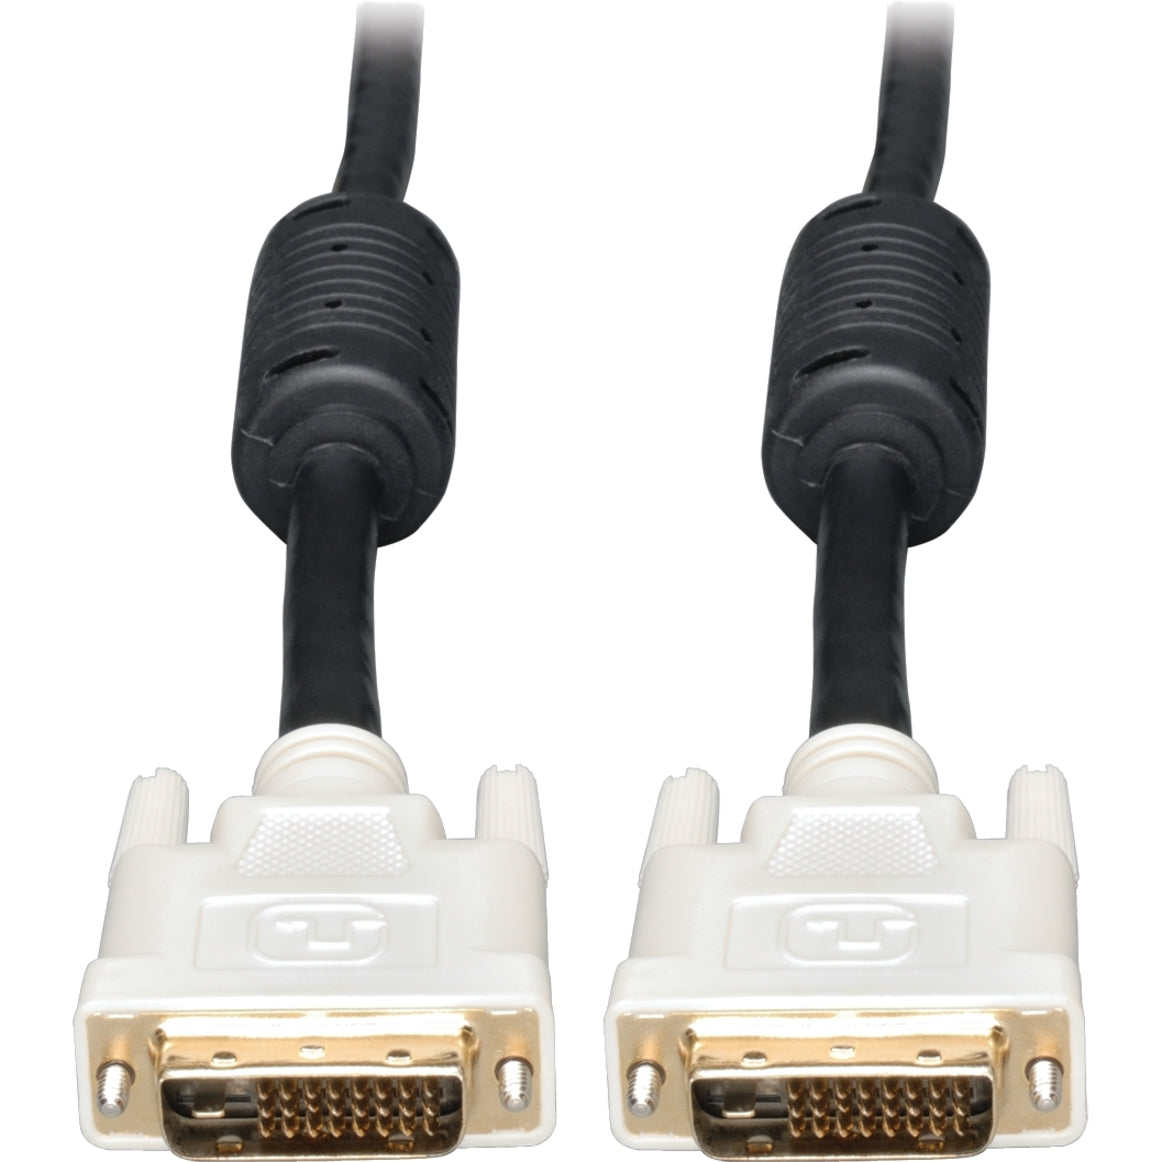 Tripp Lite P560-001 1-ft. DVI Dual Link TMDS Cable, Molded, Copper Conductor, Shielded, Gold Plated Connectors, 1 ft Length, Black